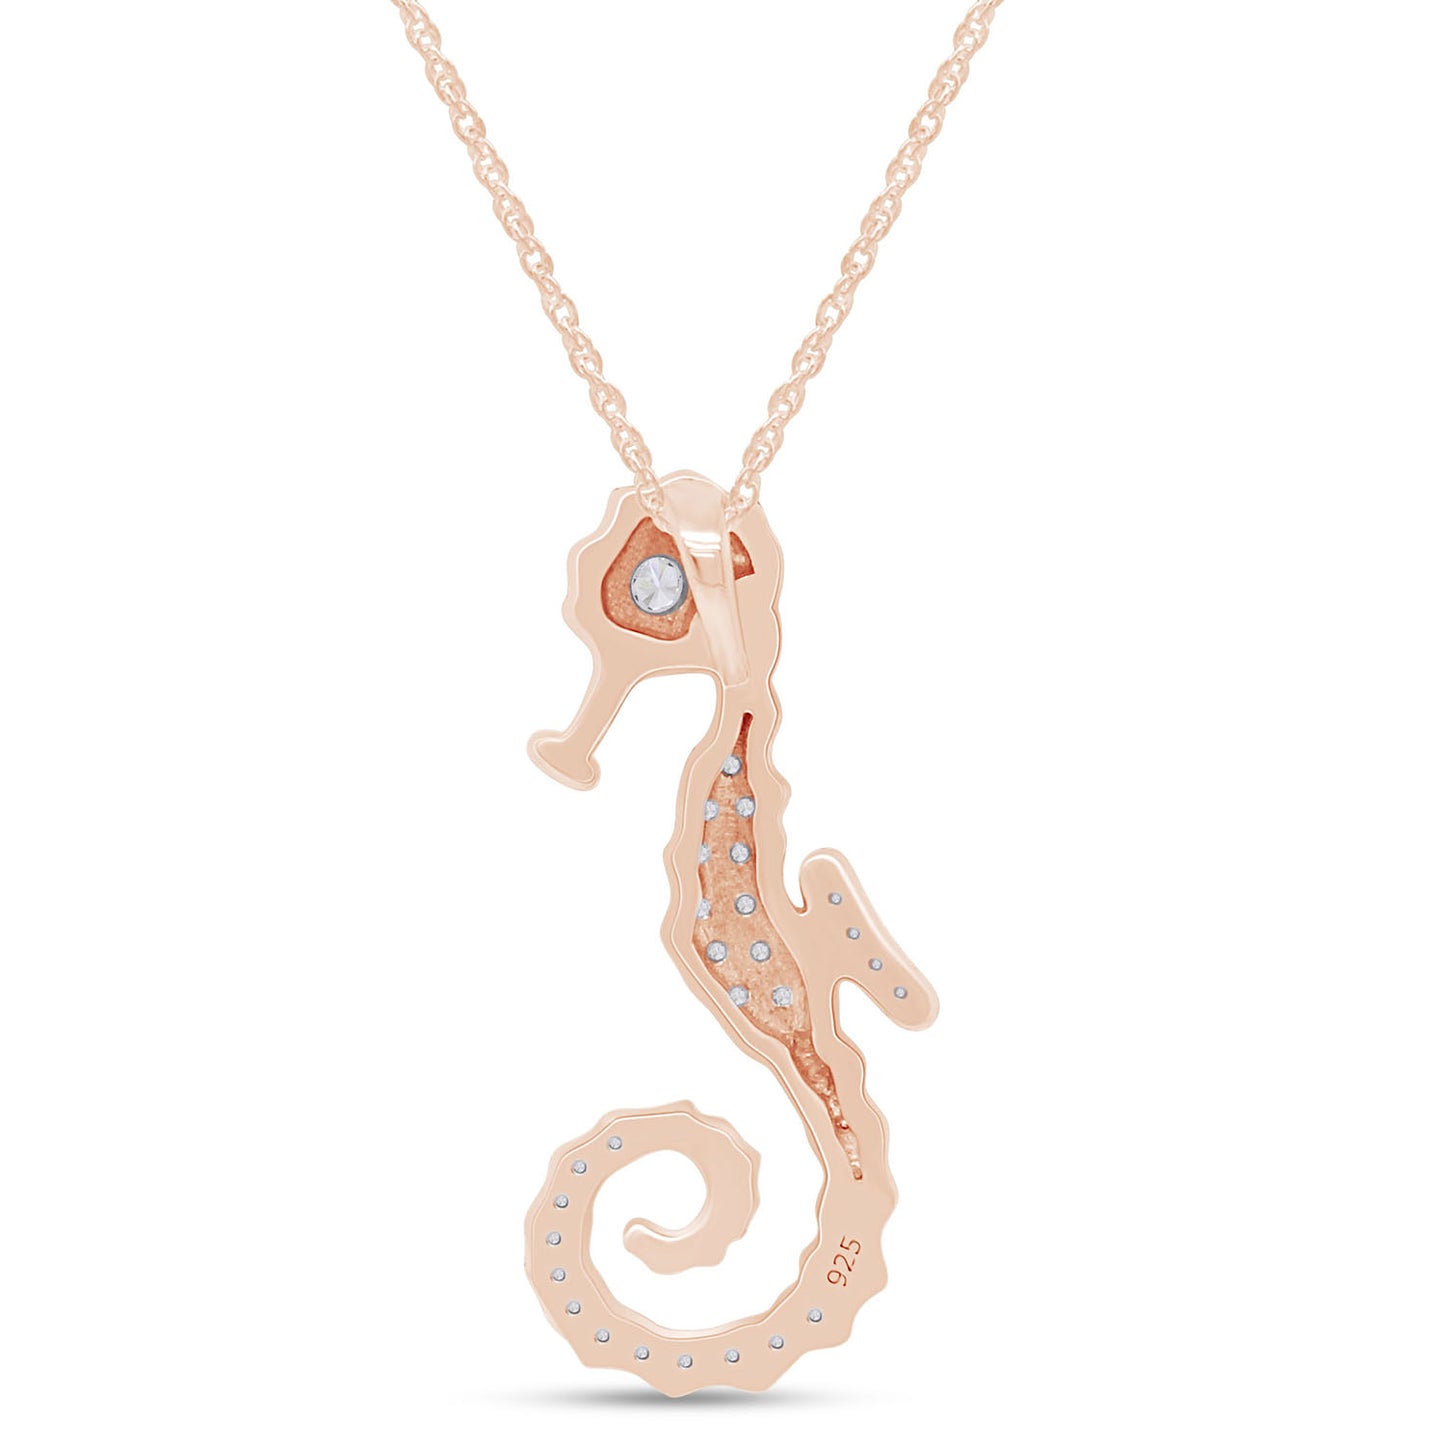 1/8 Carat Round White Natural Diamond Seahorse Pendant Necklace In 925 Sterling Silver